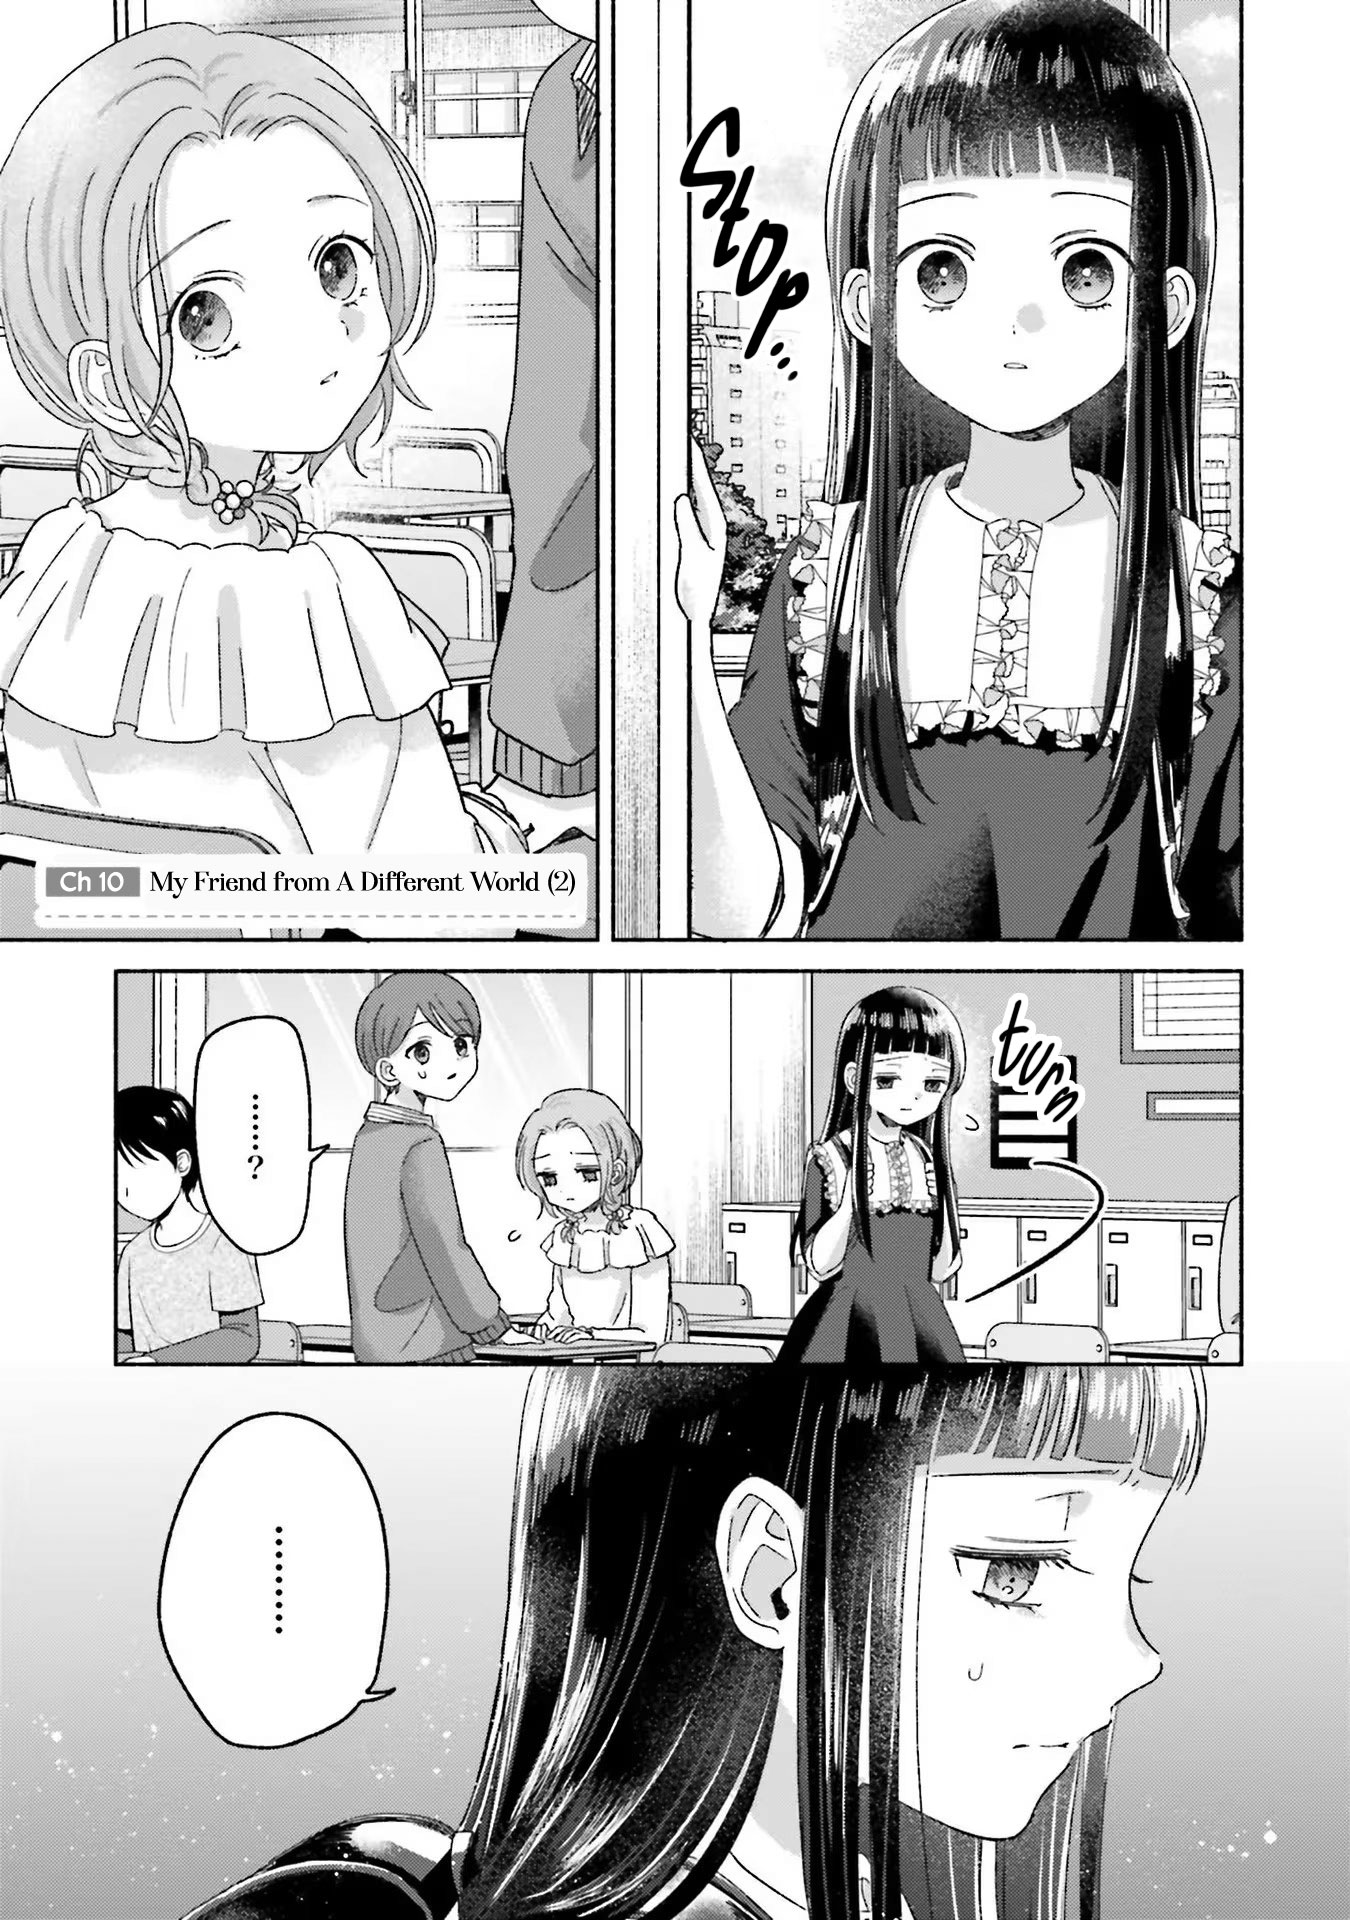 Rinko-Chan To Himosugara Vol.2 Chapter 10: My Friend From A Different World (2) - Picture 1